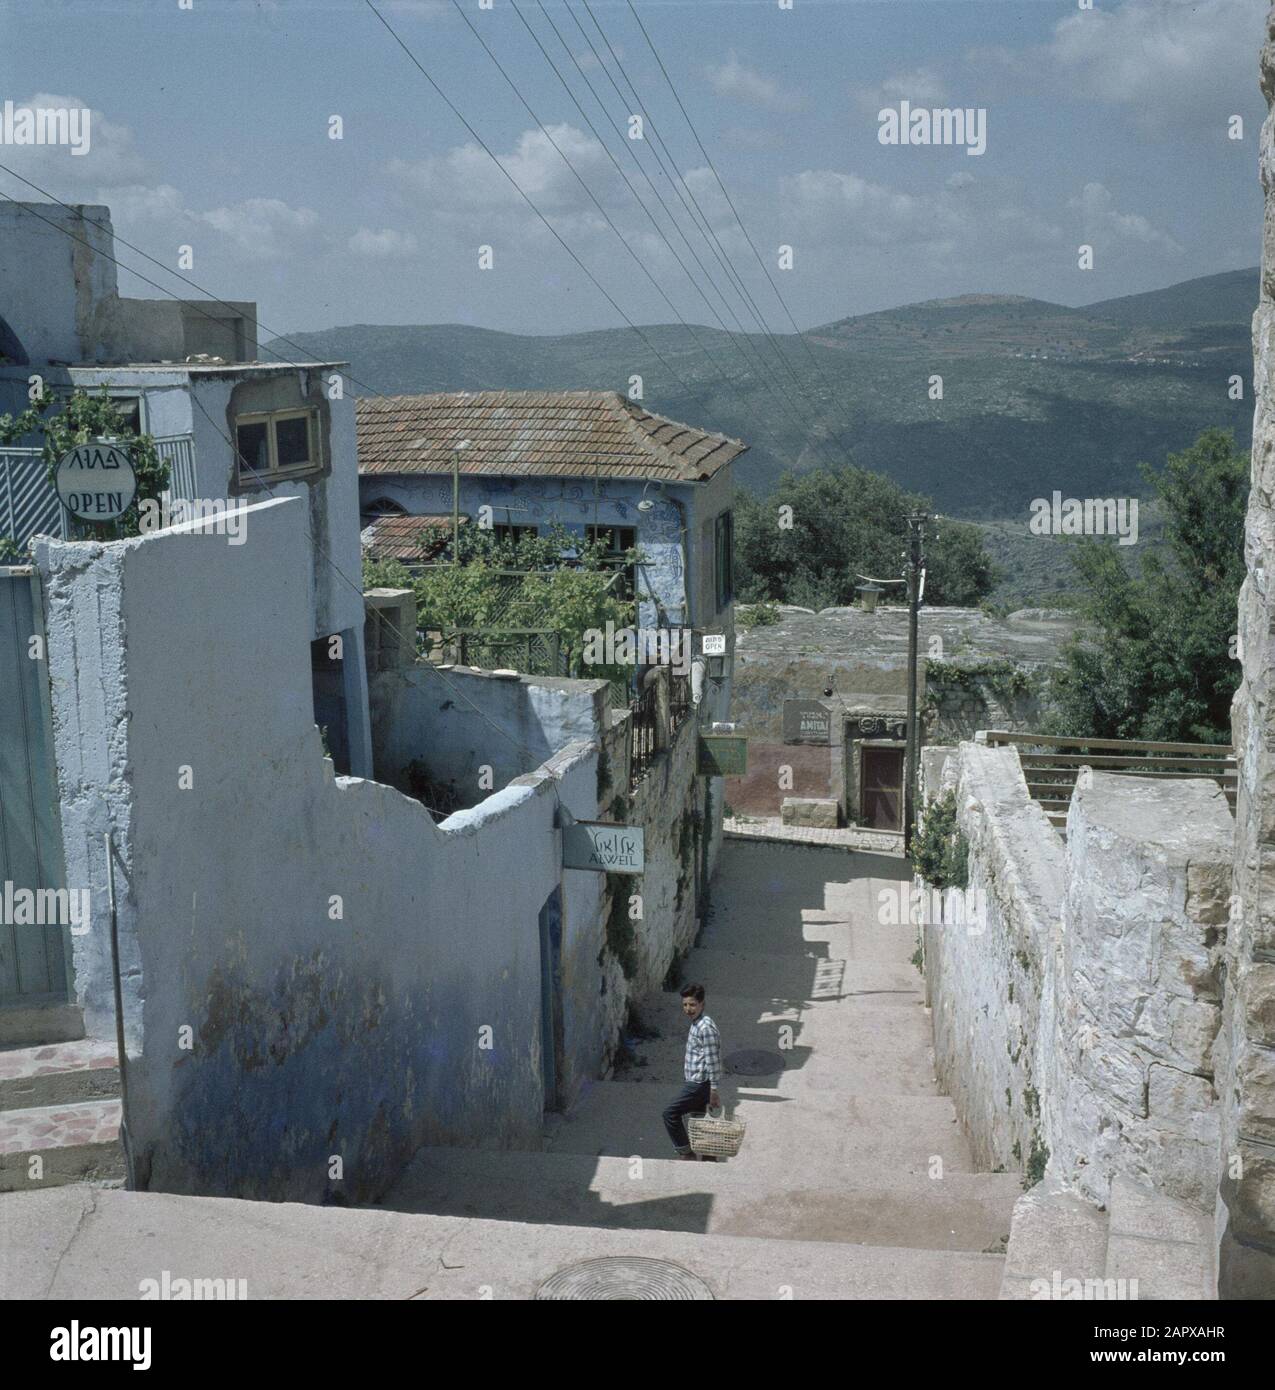 Safad. Artists' colony: street with wide stairs with on the left the workshops of the artists Alweil and Merzer and at the end of the street Amitai Date: undated Location: Israel, Safed Keywords: workshops, hills, artists' colonies, street sculptures, stairs, dwellings Personal name: Alweil, Arieth, Amitai, Itzhak, Merzer, Arieth Stock Photo